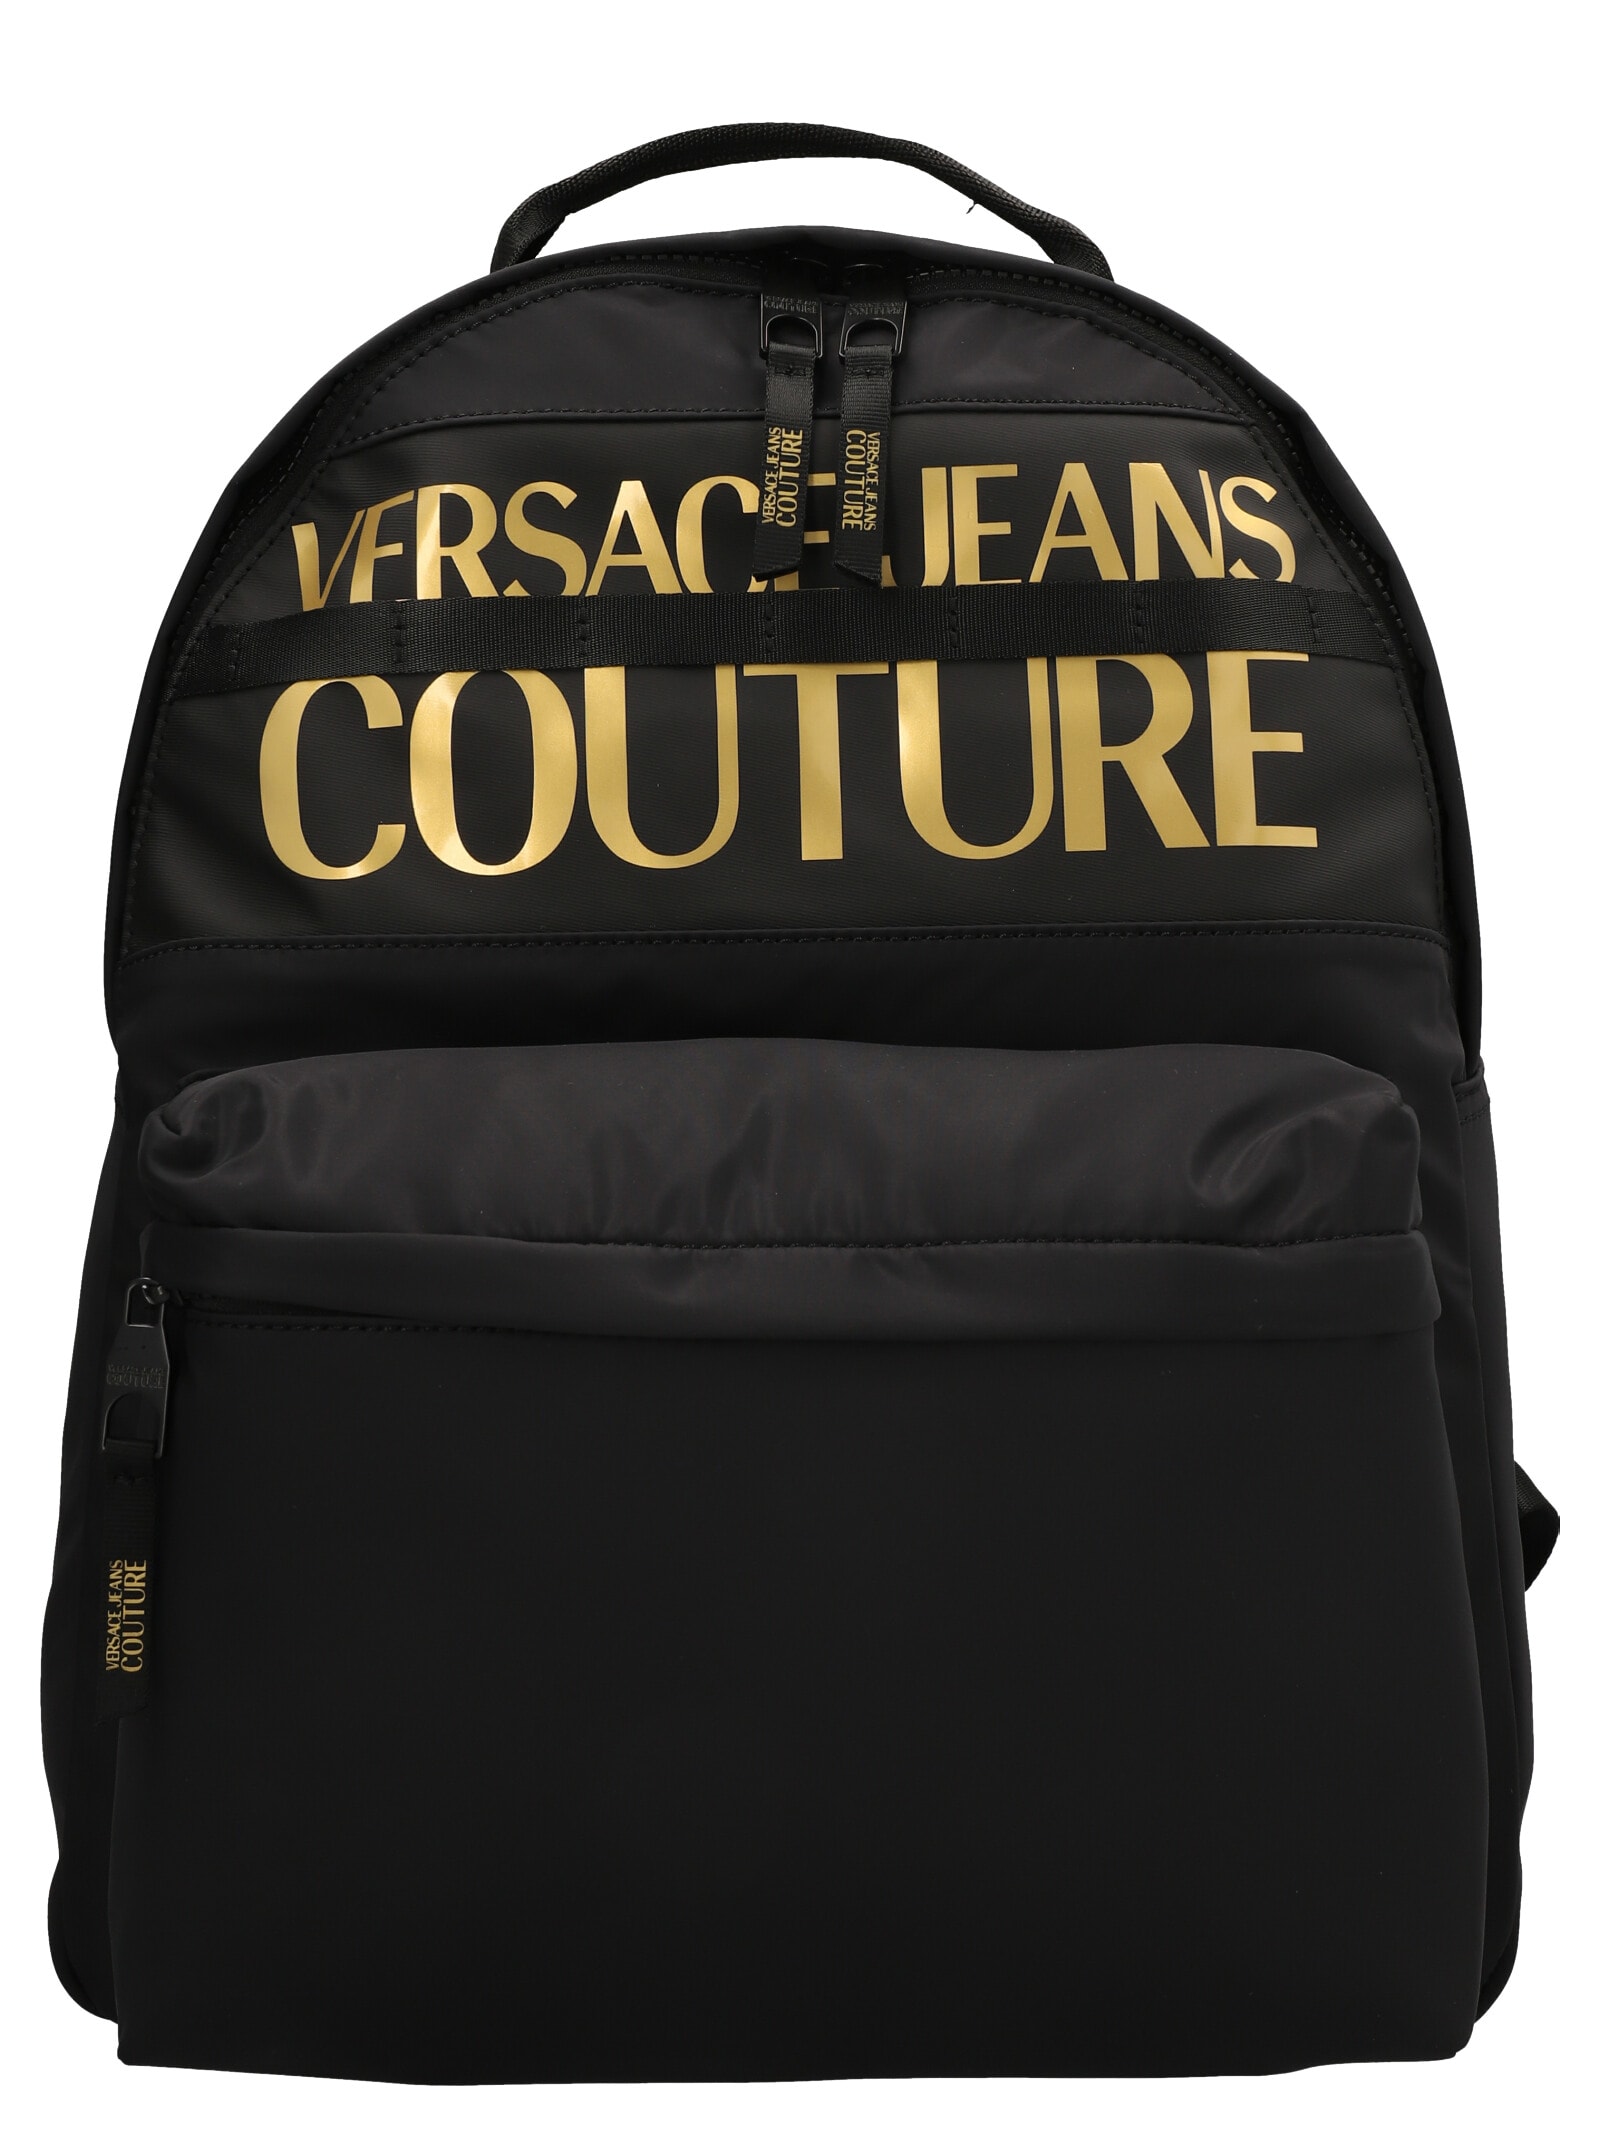 Versace Jeans Couture Logo Backpack